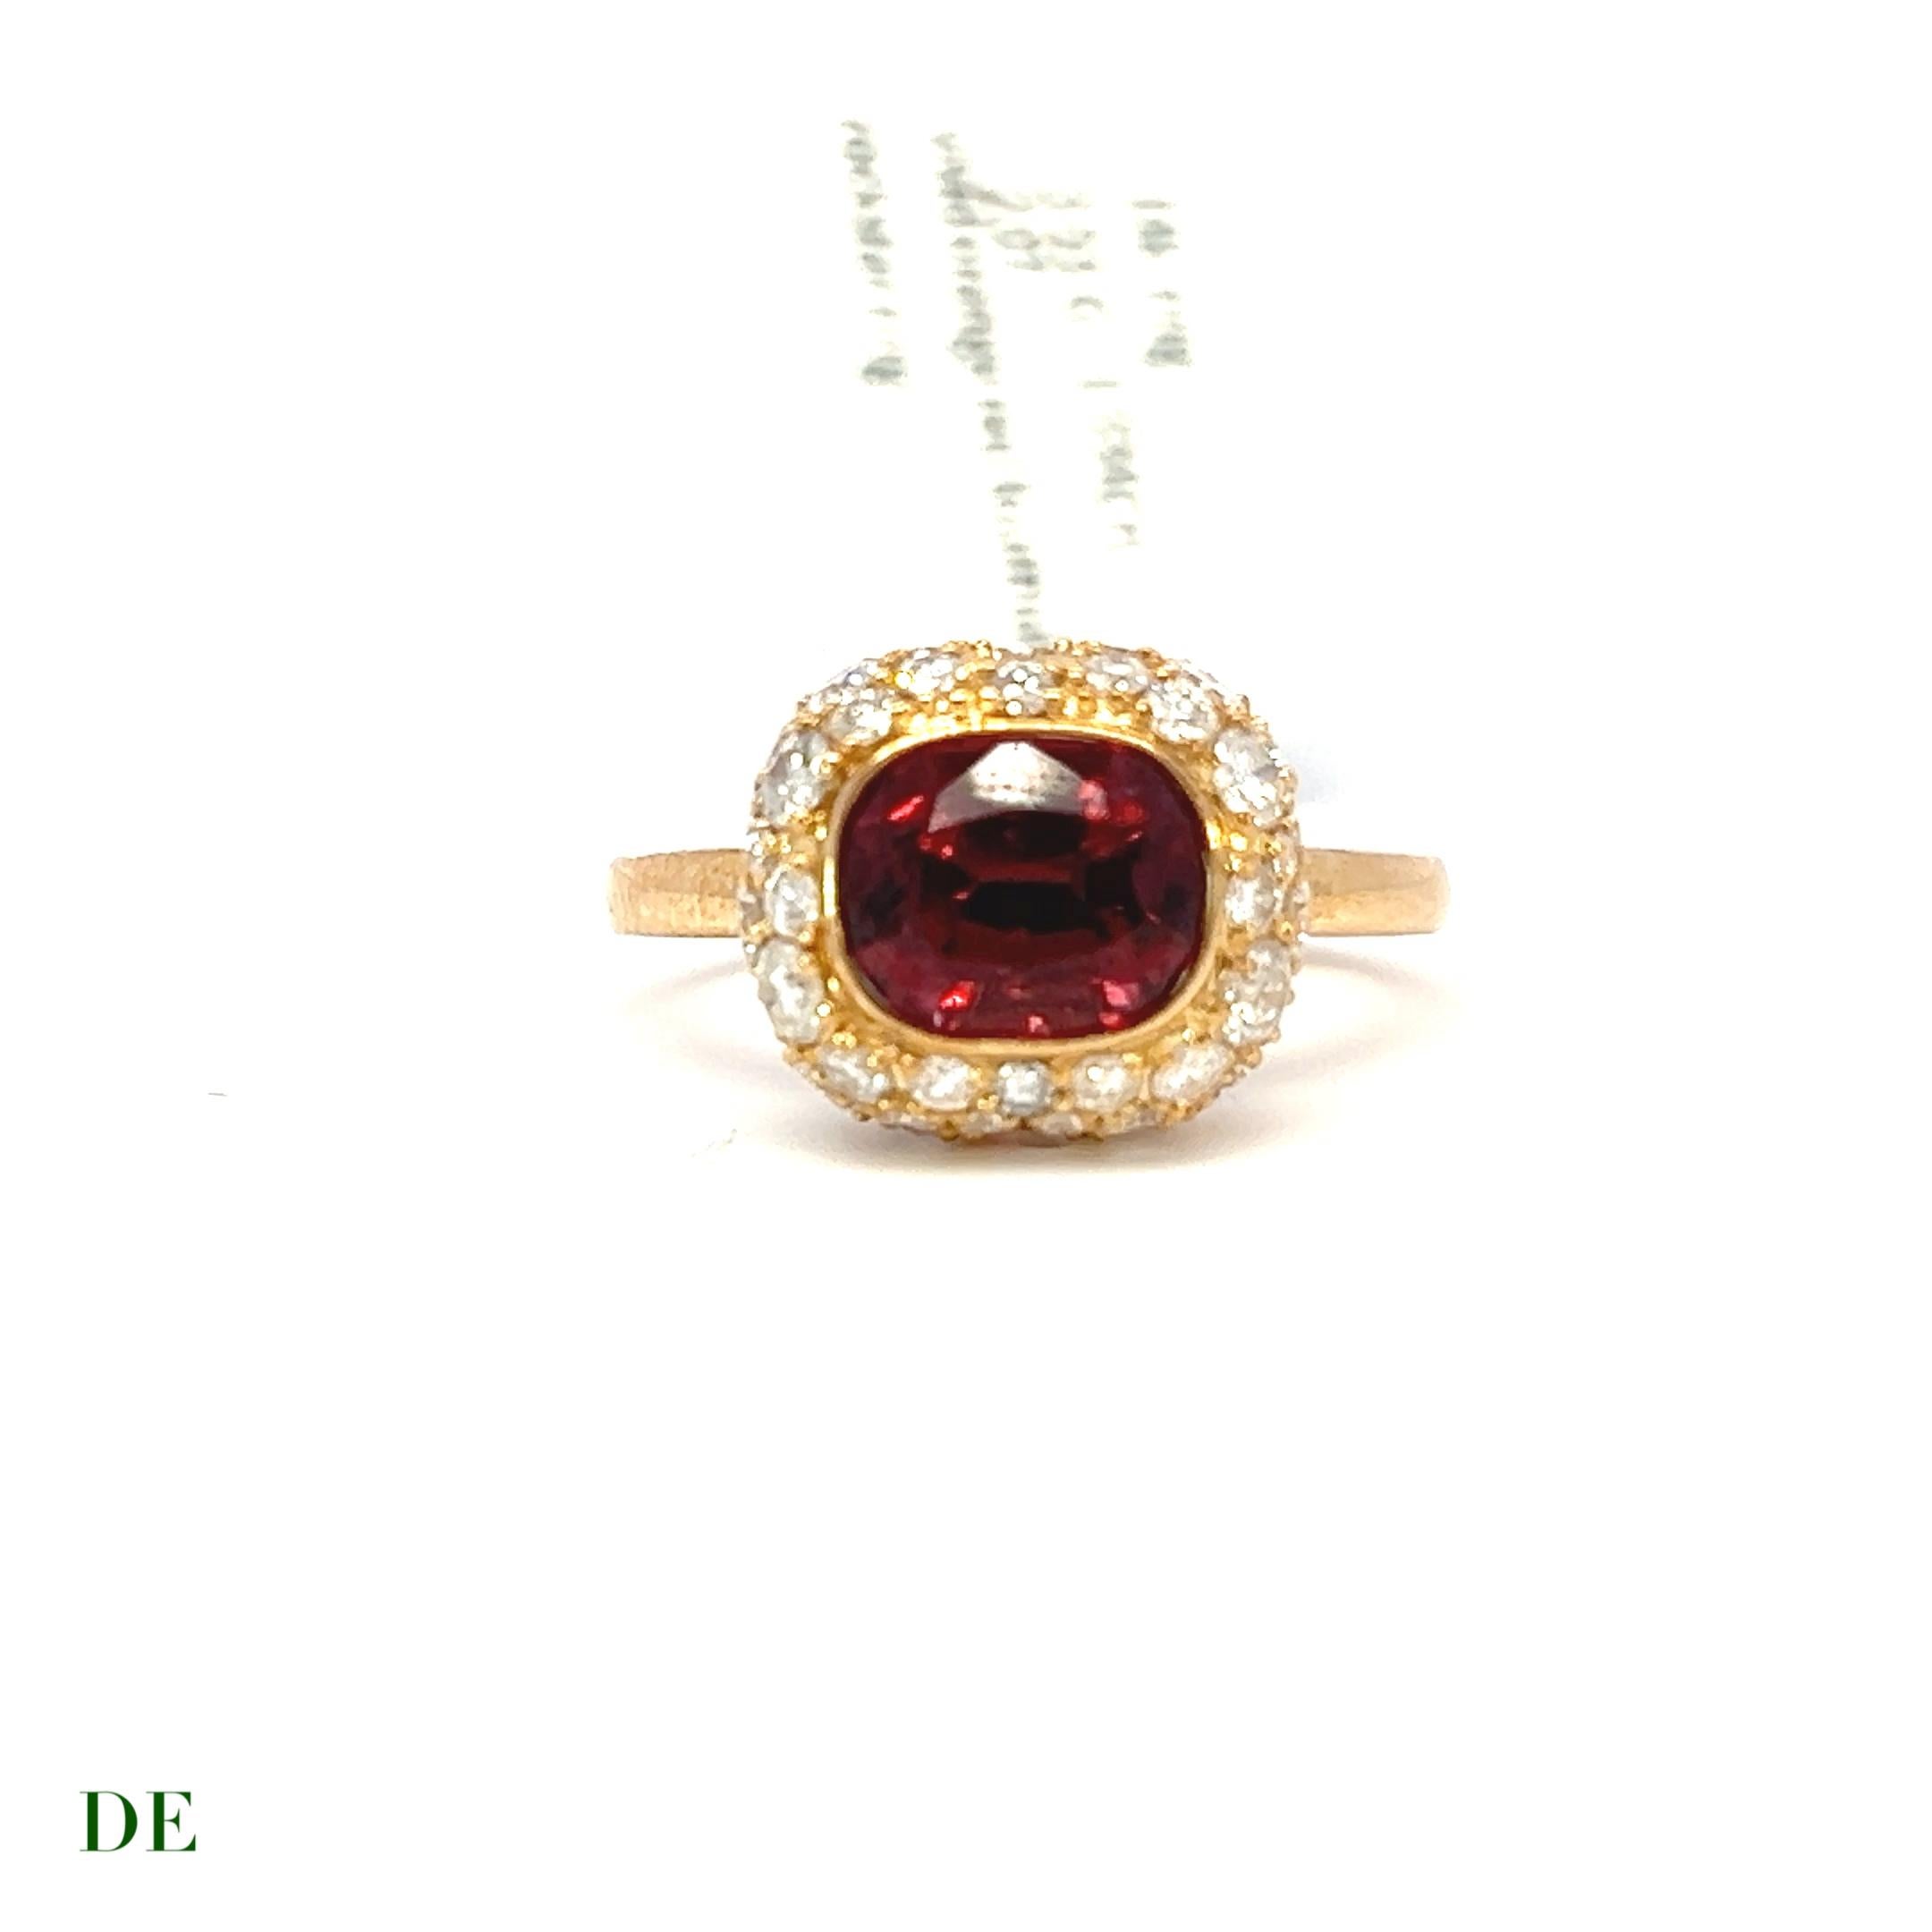 Stylish 14k 2.07 ct burgundy red oval tourmaline 1.33 Ct Diamond Heart Pop Ring

Introducing a ring that exudes both style and elegance: the Stylish 14k 2.07 ct Burgundy Red Oval Tourmaline 1.33 Ct Diamond Heart Pop Ring. This exquisite piece of